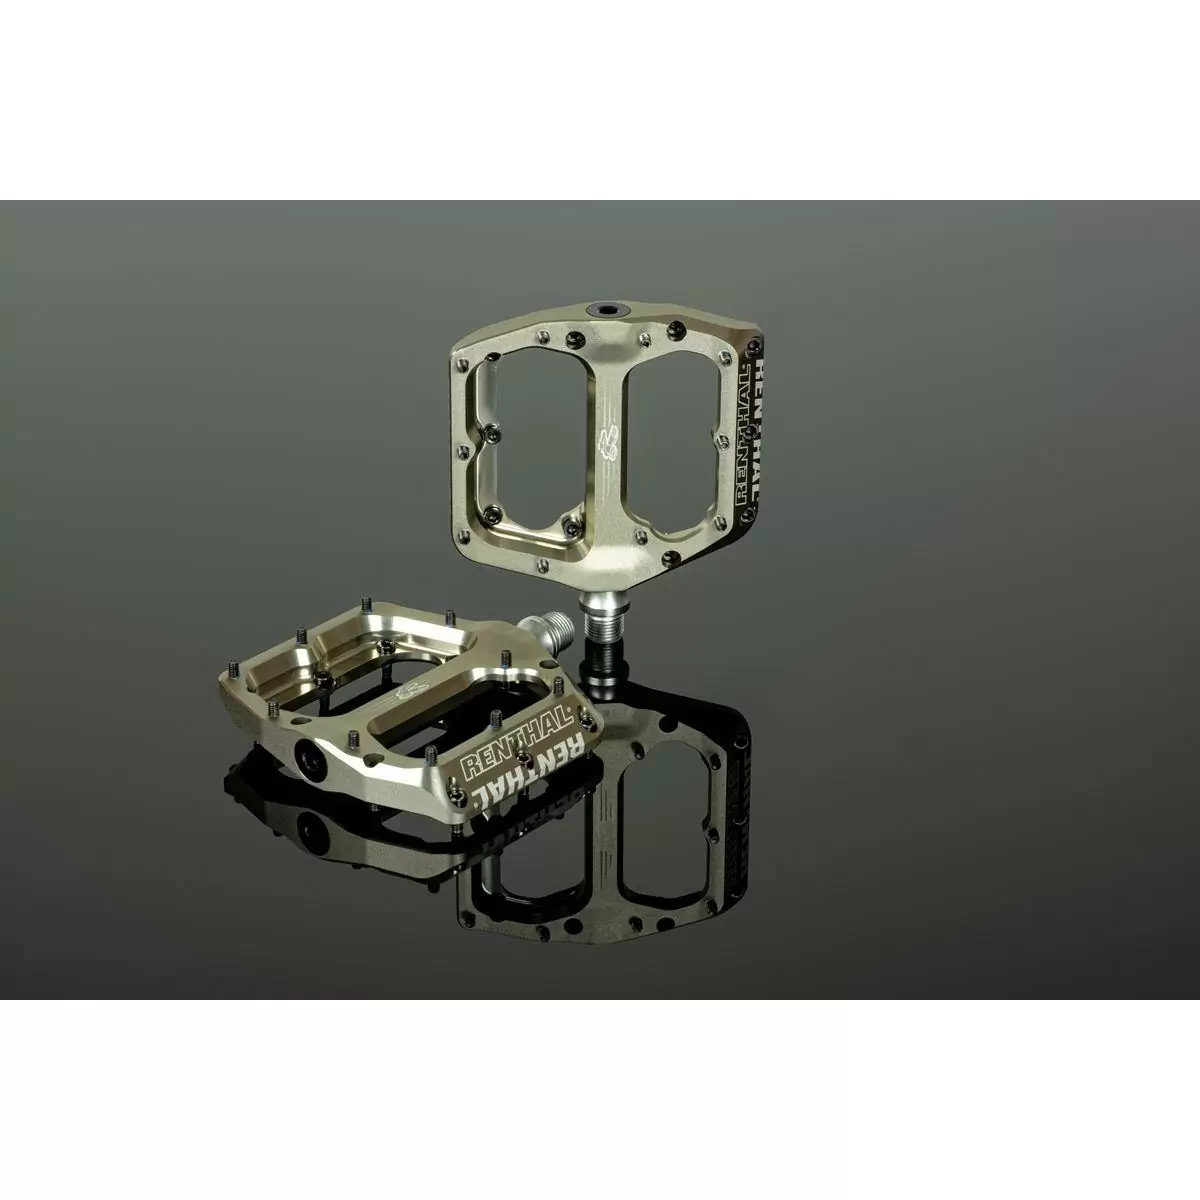 Pair of Revo-F AluGold Flat Pedals #1